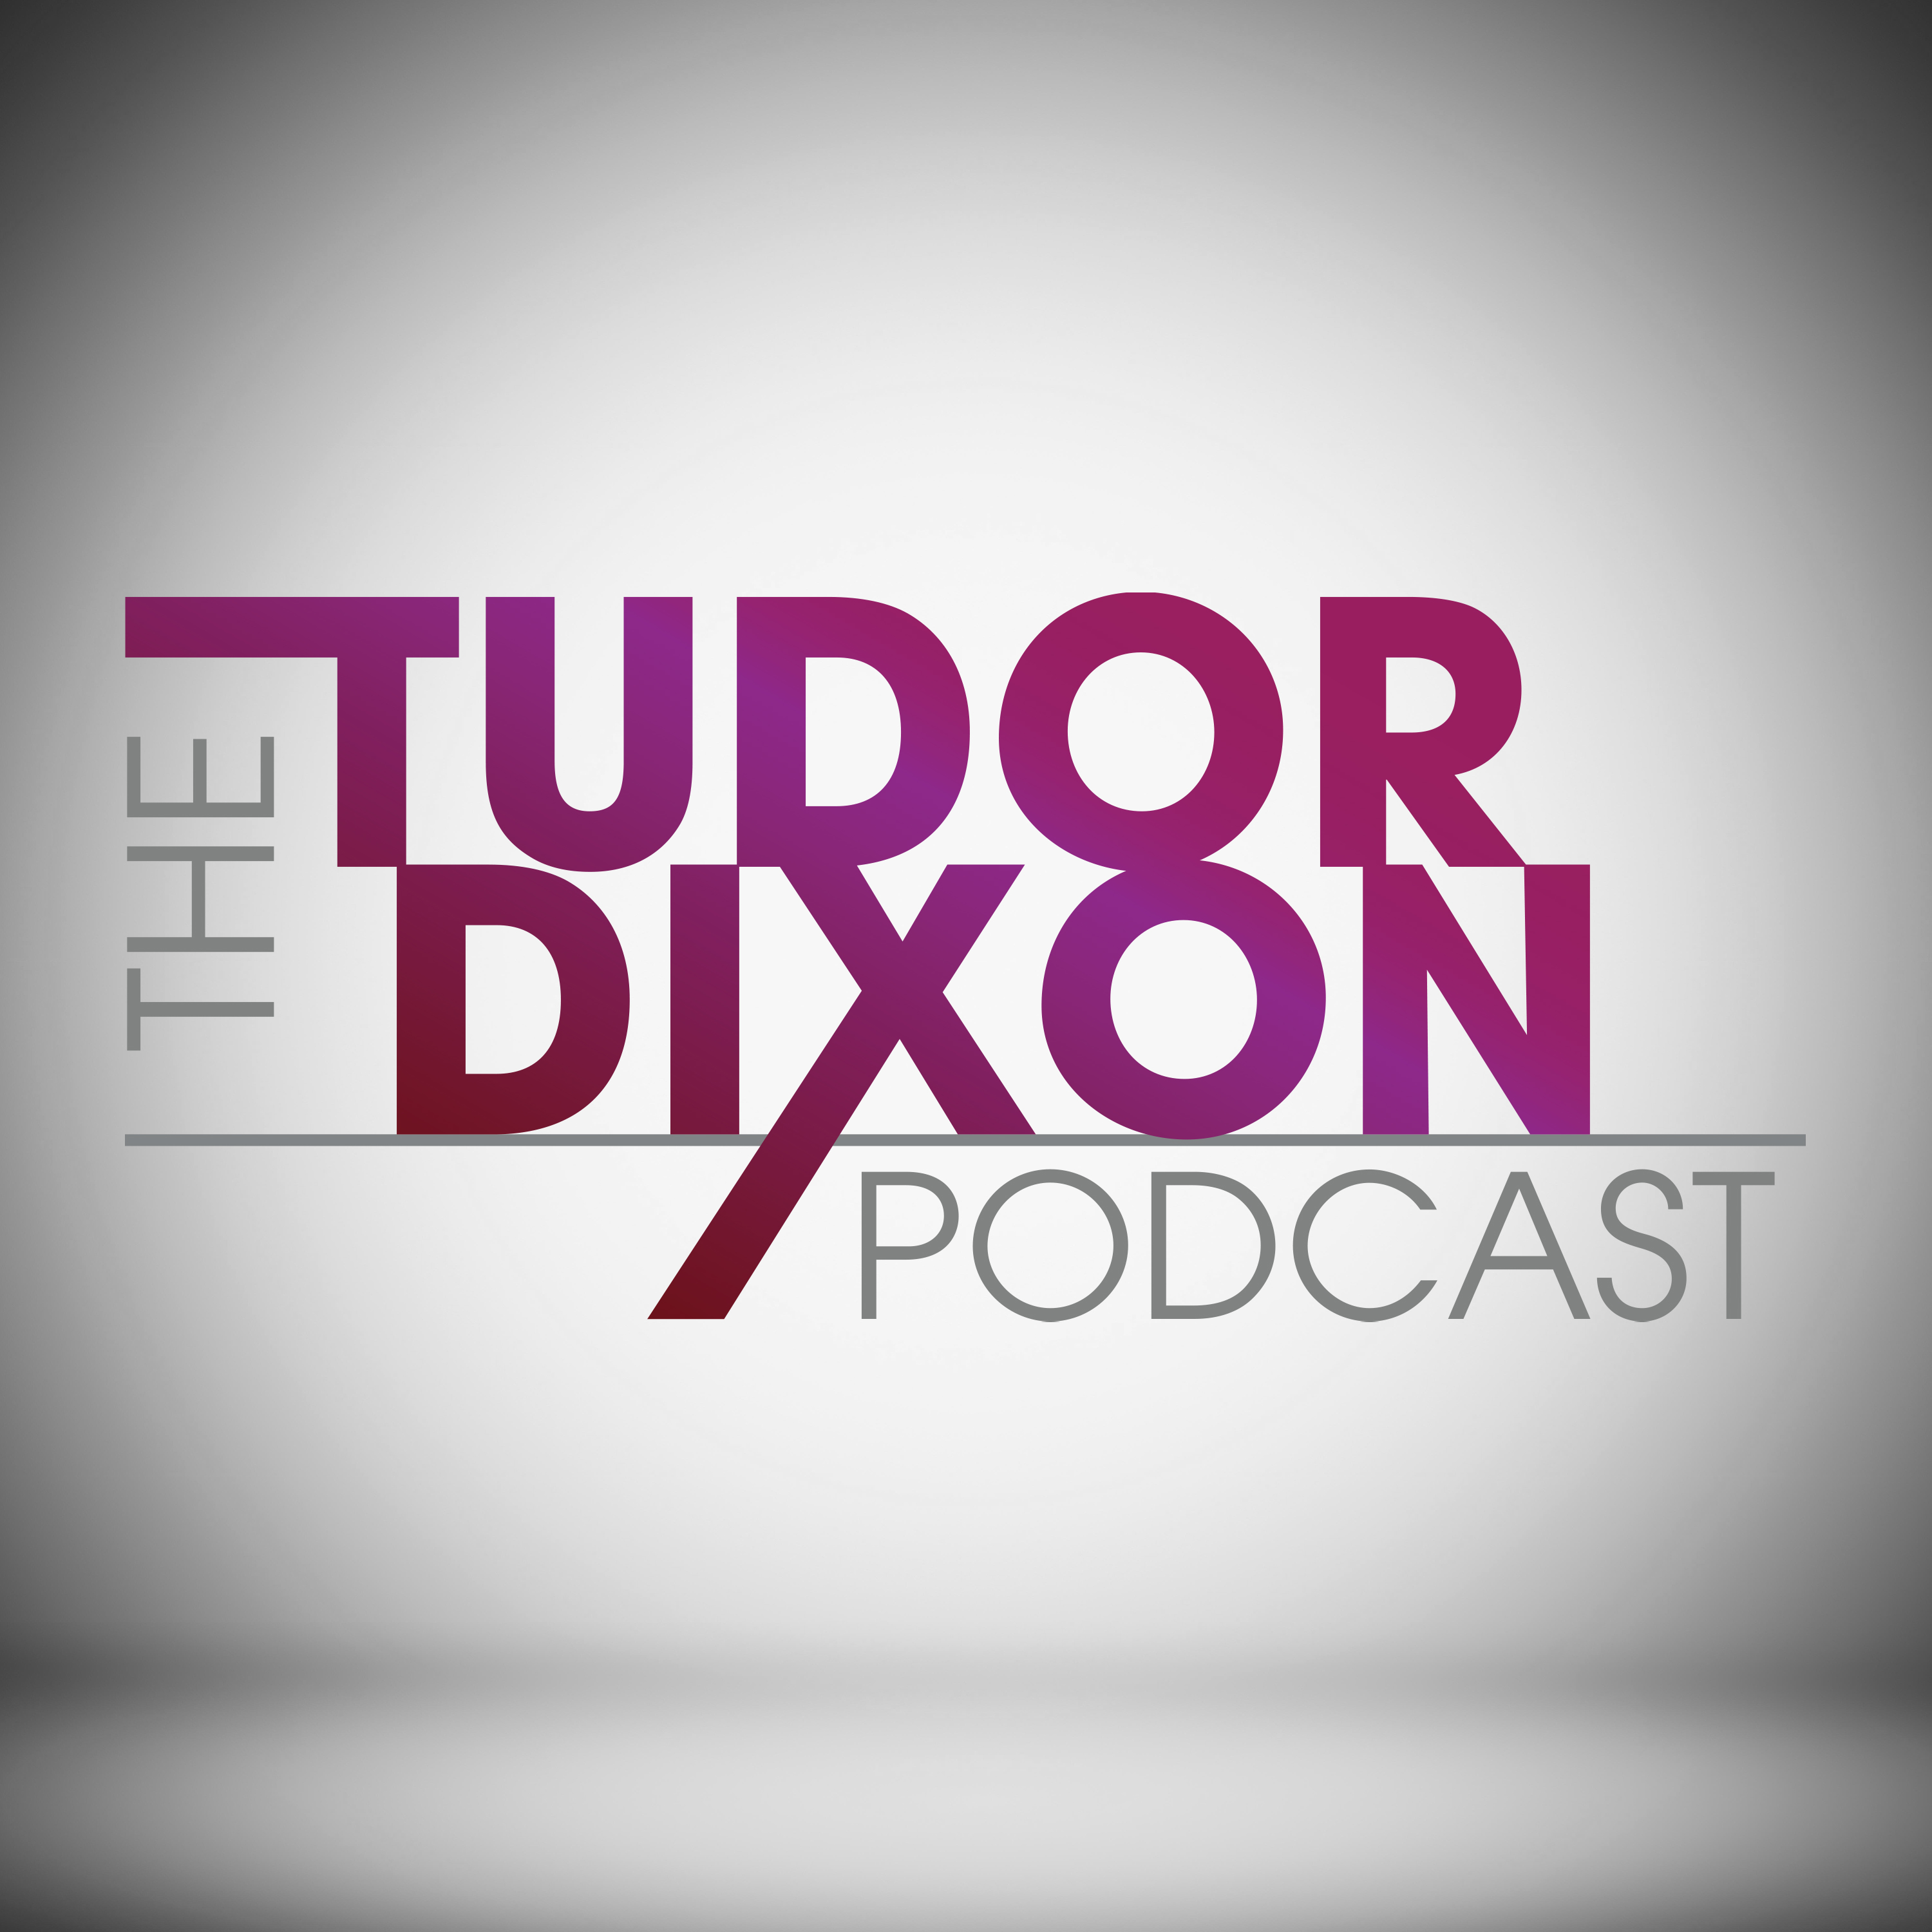 The Tudor Dixon Podcast: Hunting and Rock N' Roll with Ted Nugent